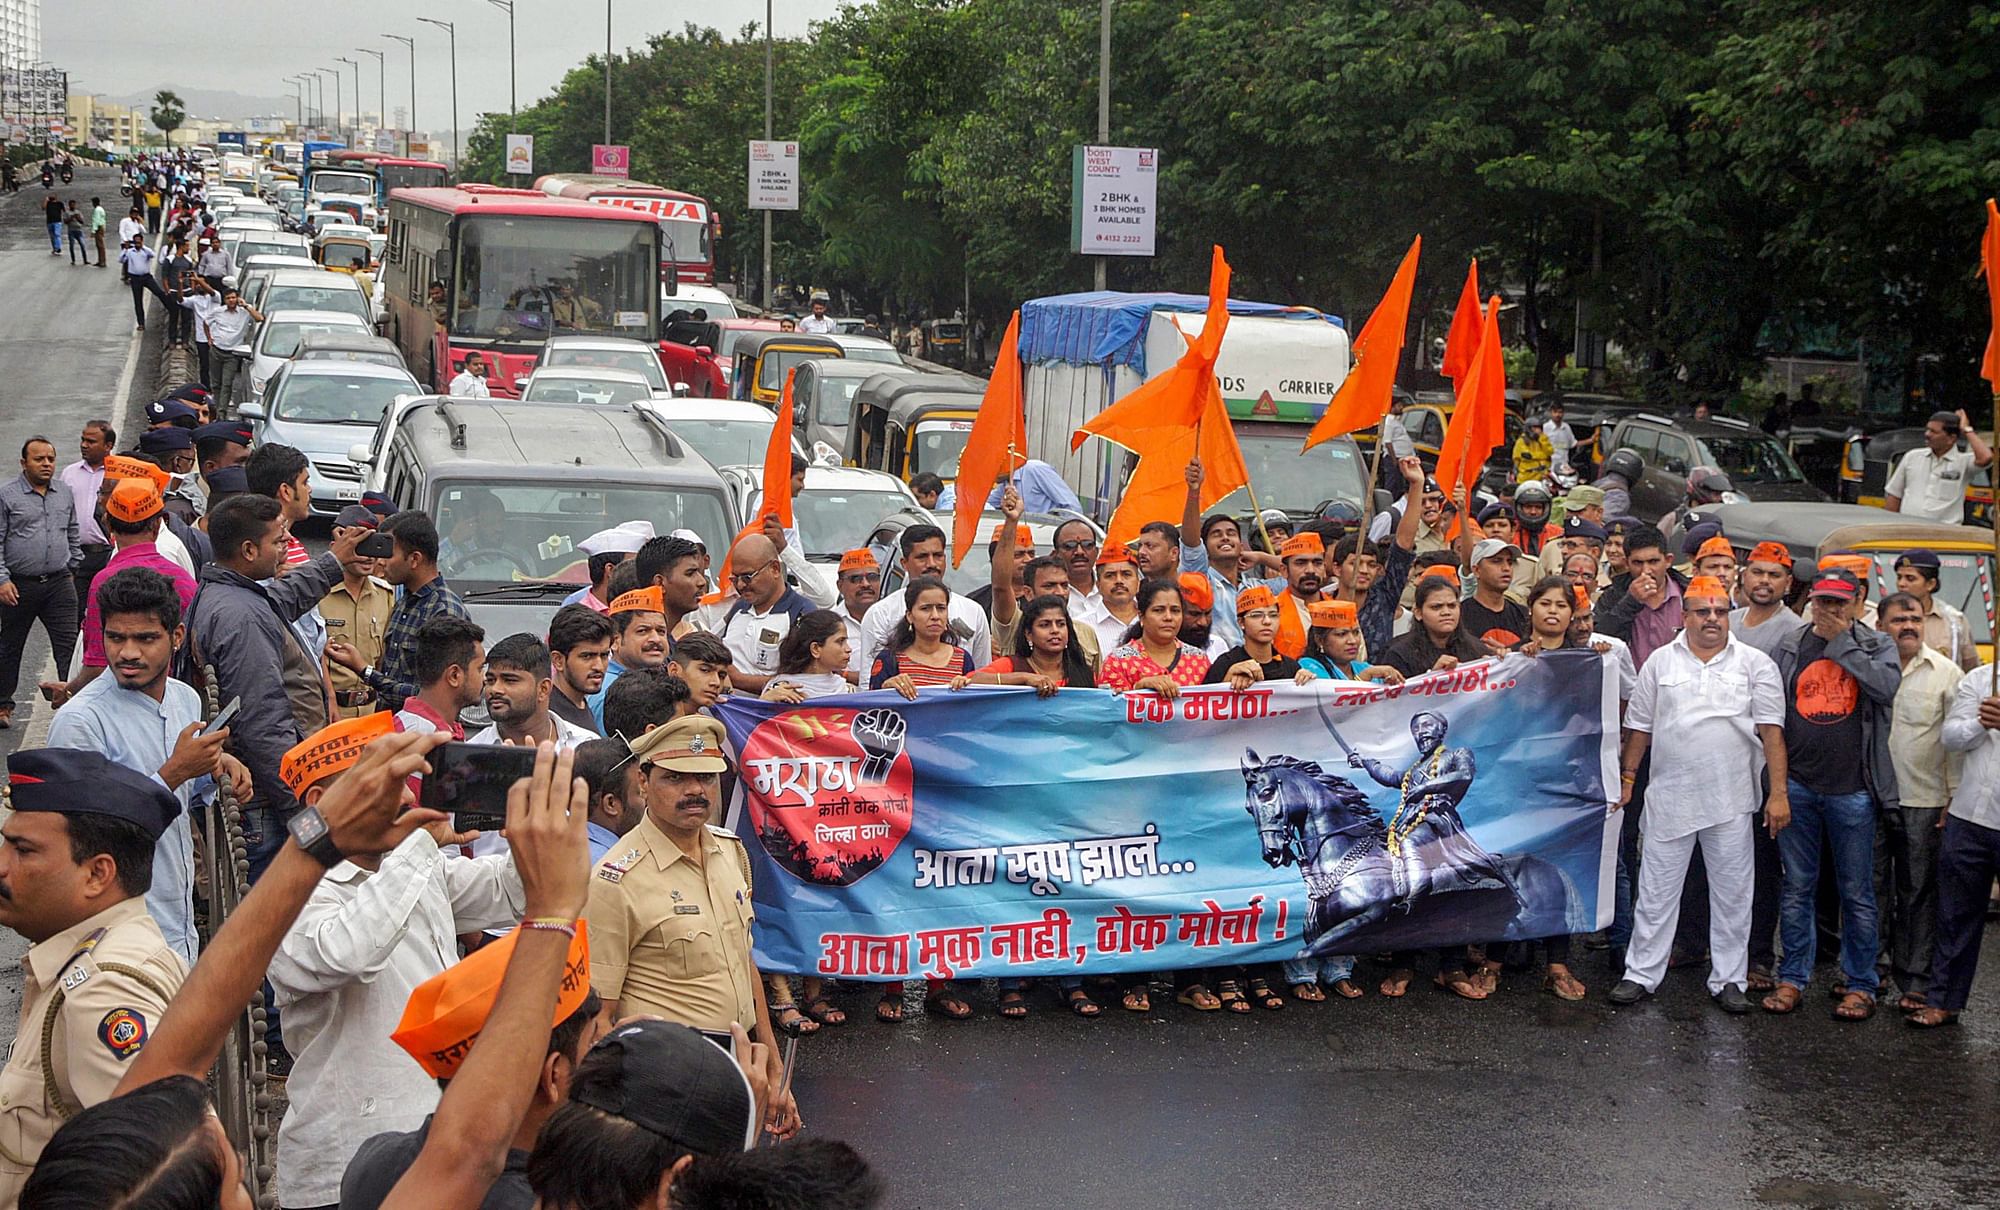 Maratha community protesters stop the traffic during their ‘Maratha Kranti Morcha Rasta Roko’ protest demanding reservation, in Thane, Mumbai on 25 July.